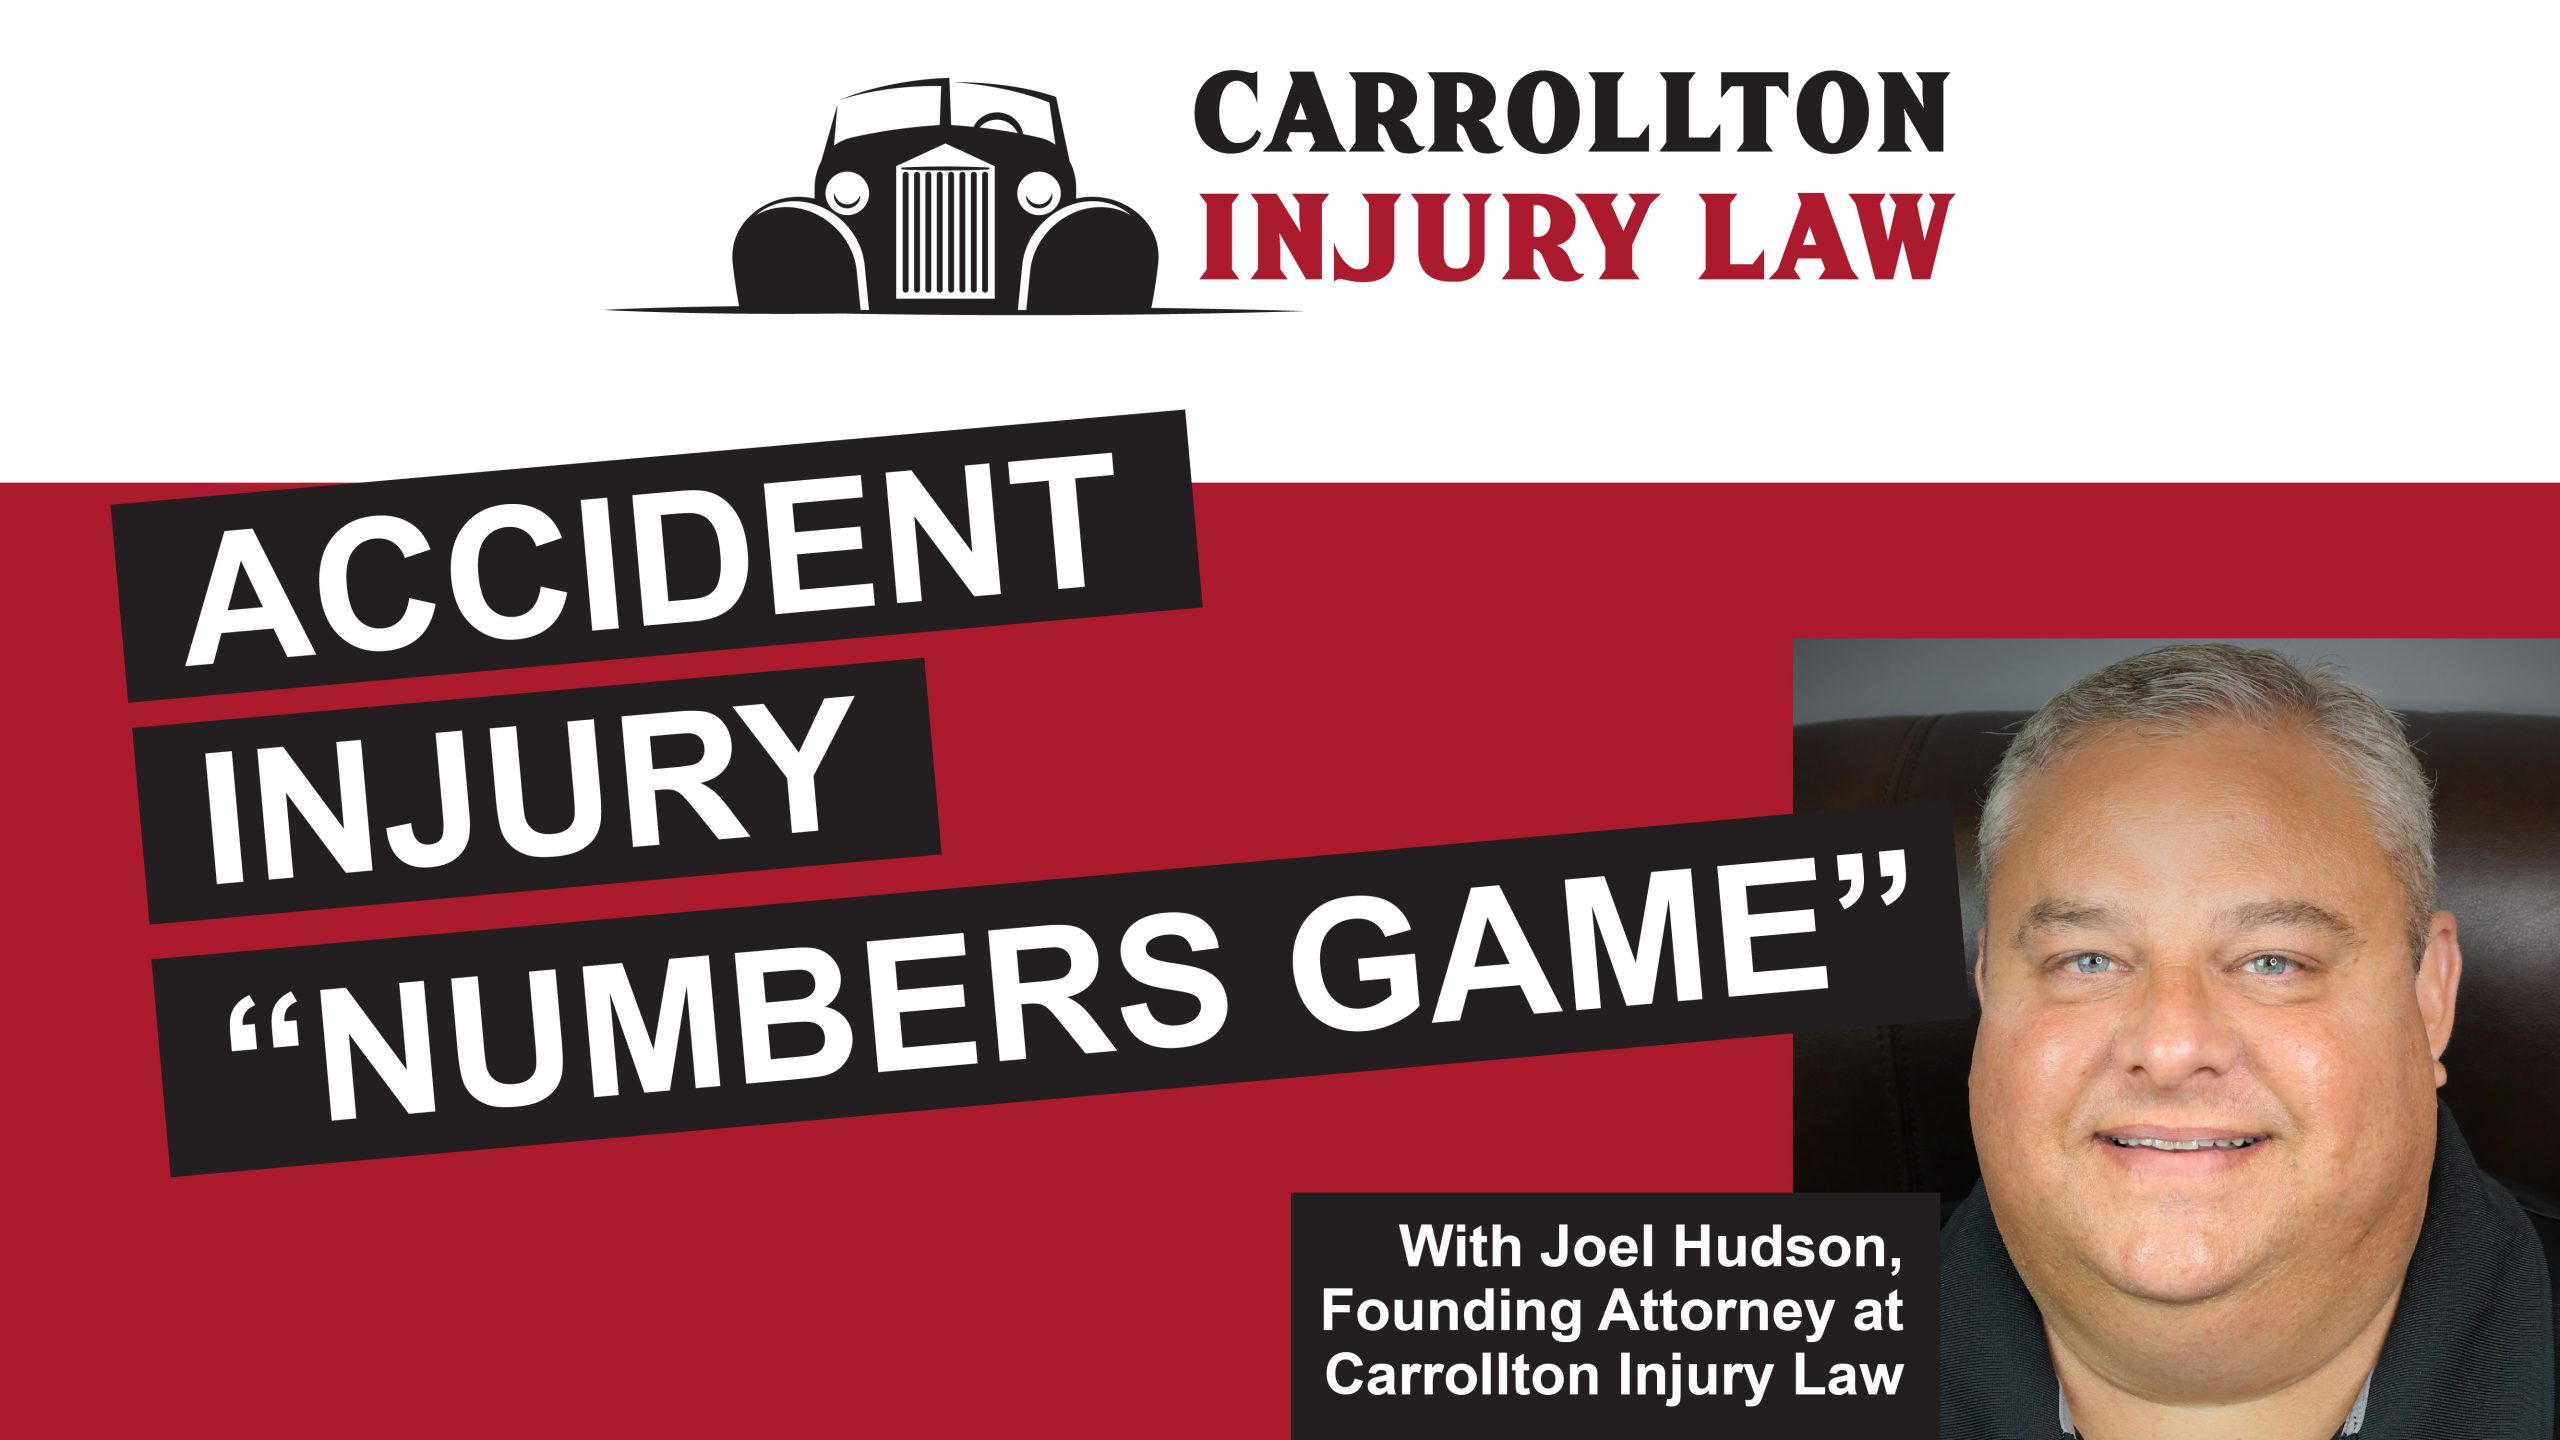 Don't play their numbers game - get a personal injury lawyer after an accident